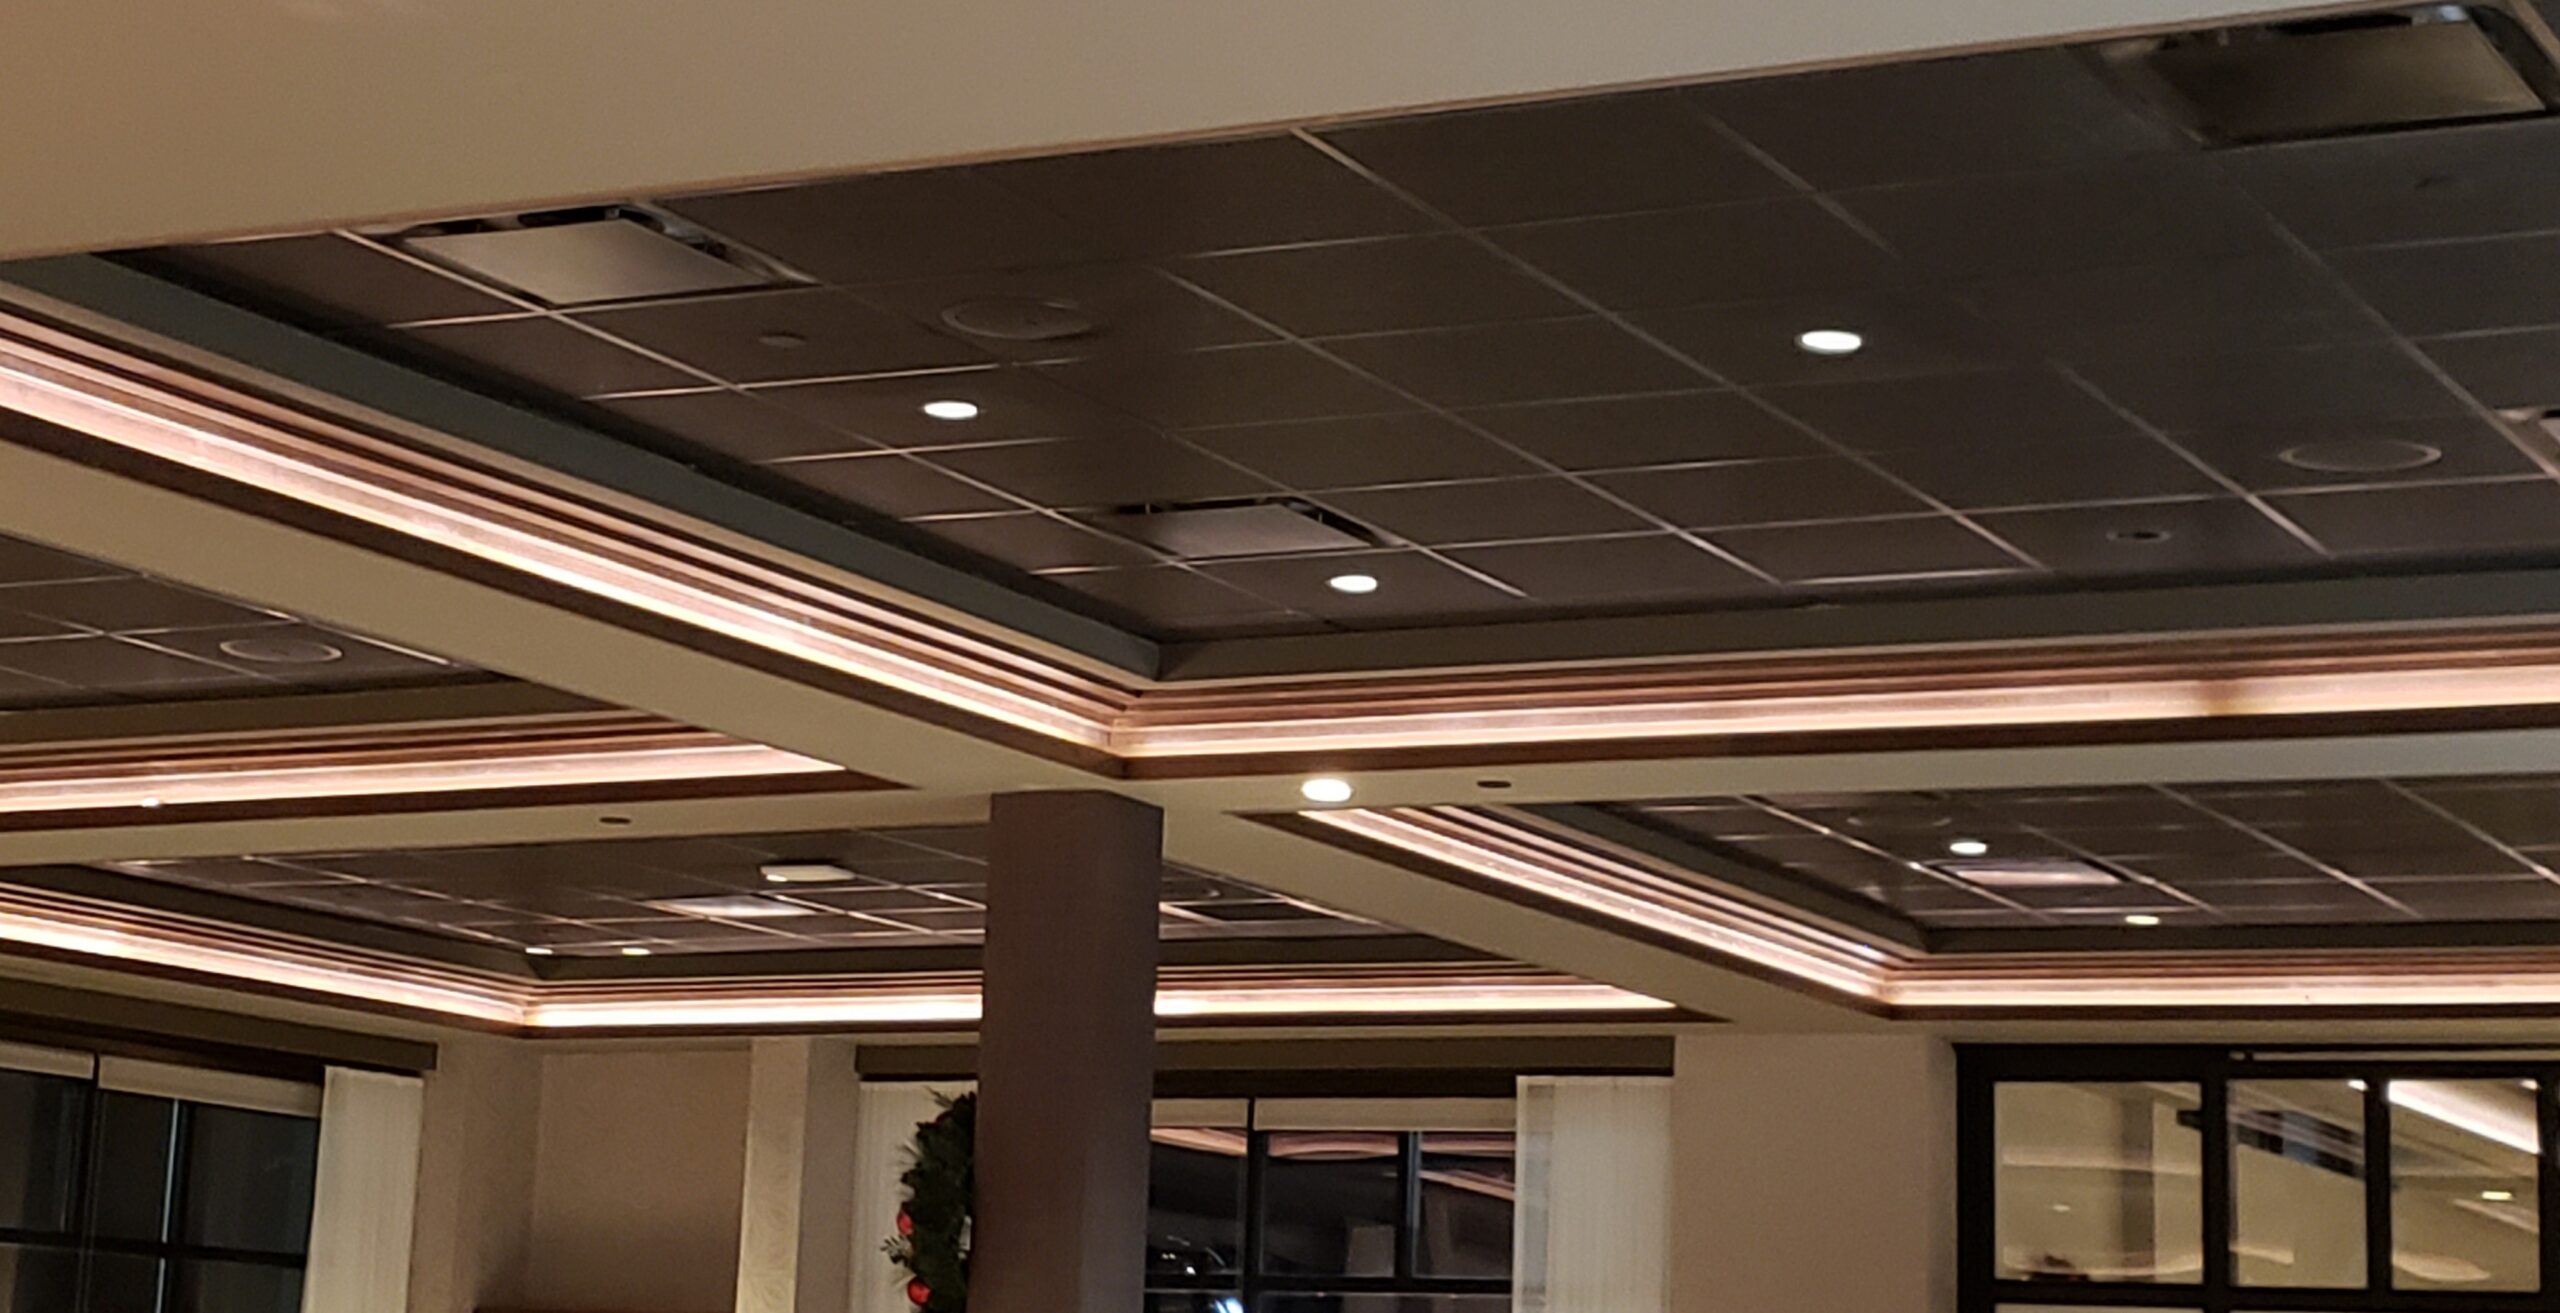 A ceiling with lights and a pillar in the middle of it